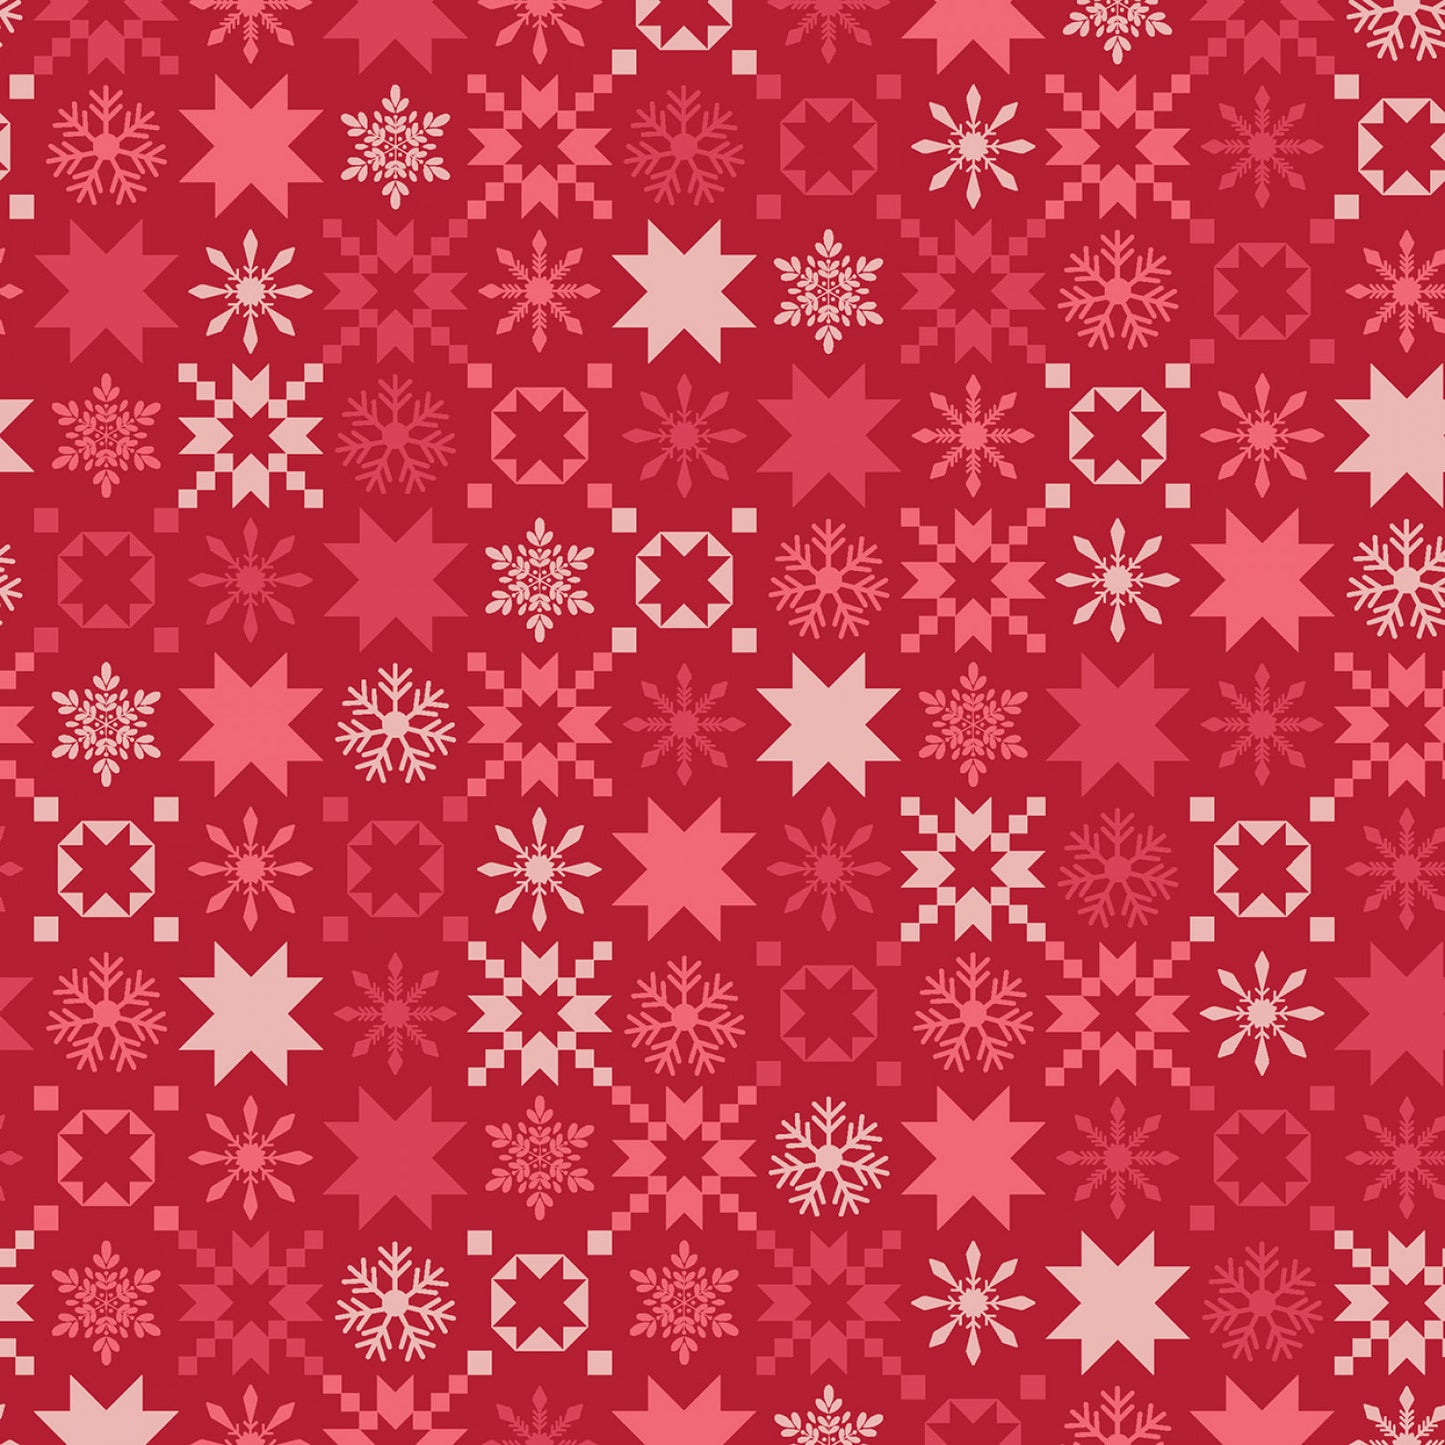 *PRE-ORDER* A Quilty Little Christmas Fabric Yardage By Kimberbell